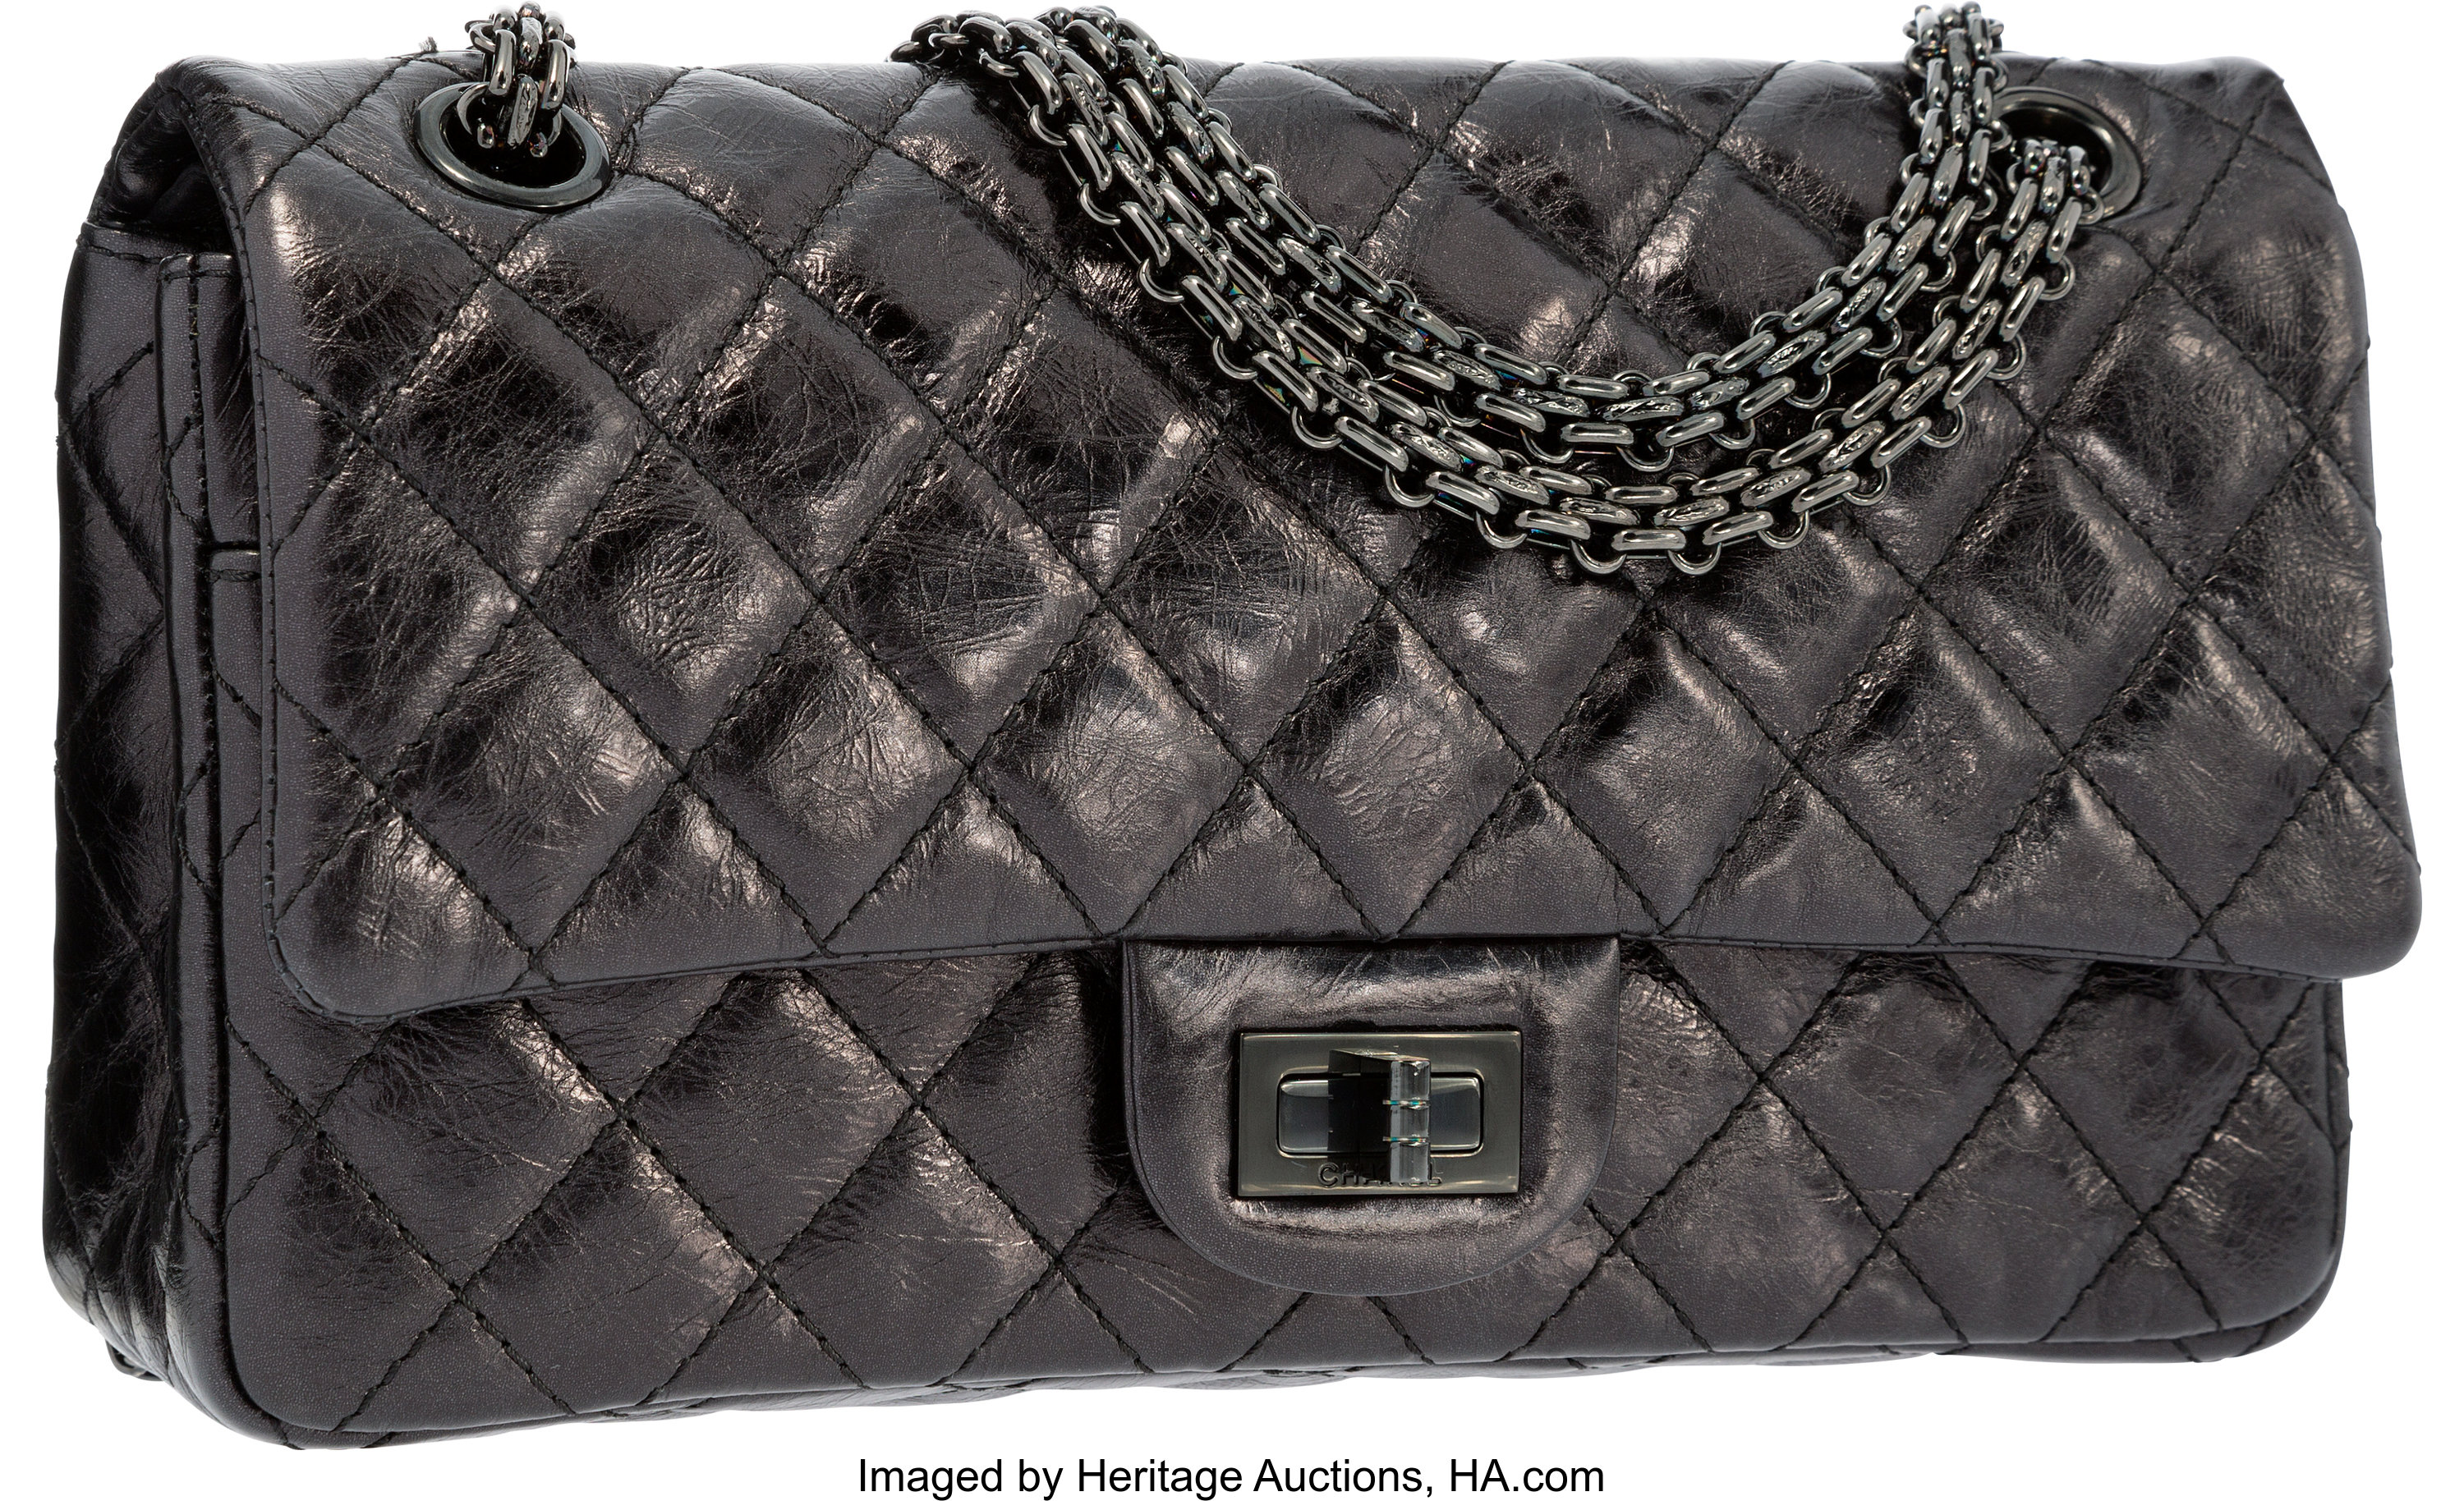 chanel large quilted tote handbag